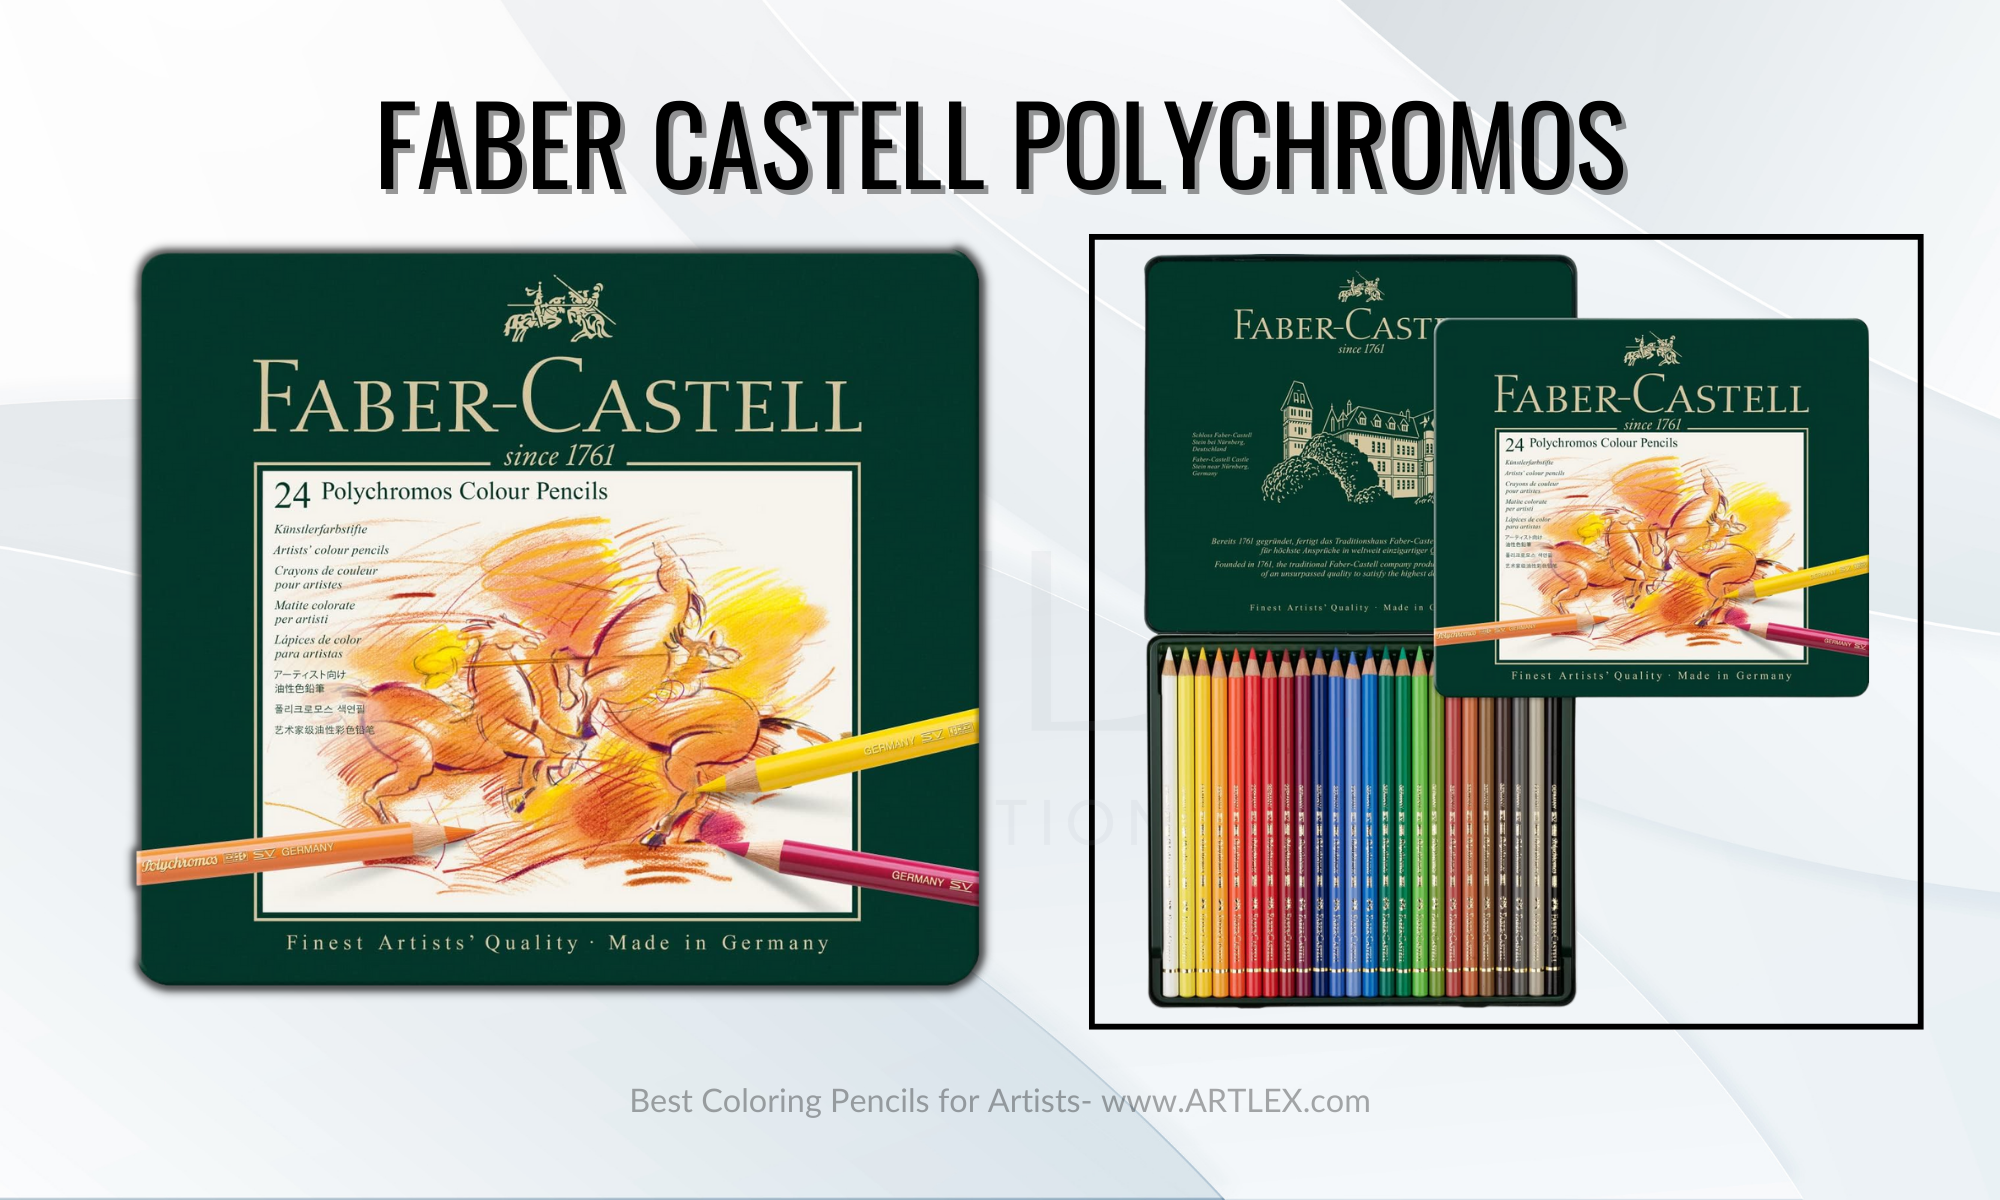 Polychromos Colored Pencils, Colored Pencils 120 Colors Delicate Wood With  Green Box For Sketching 